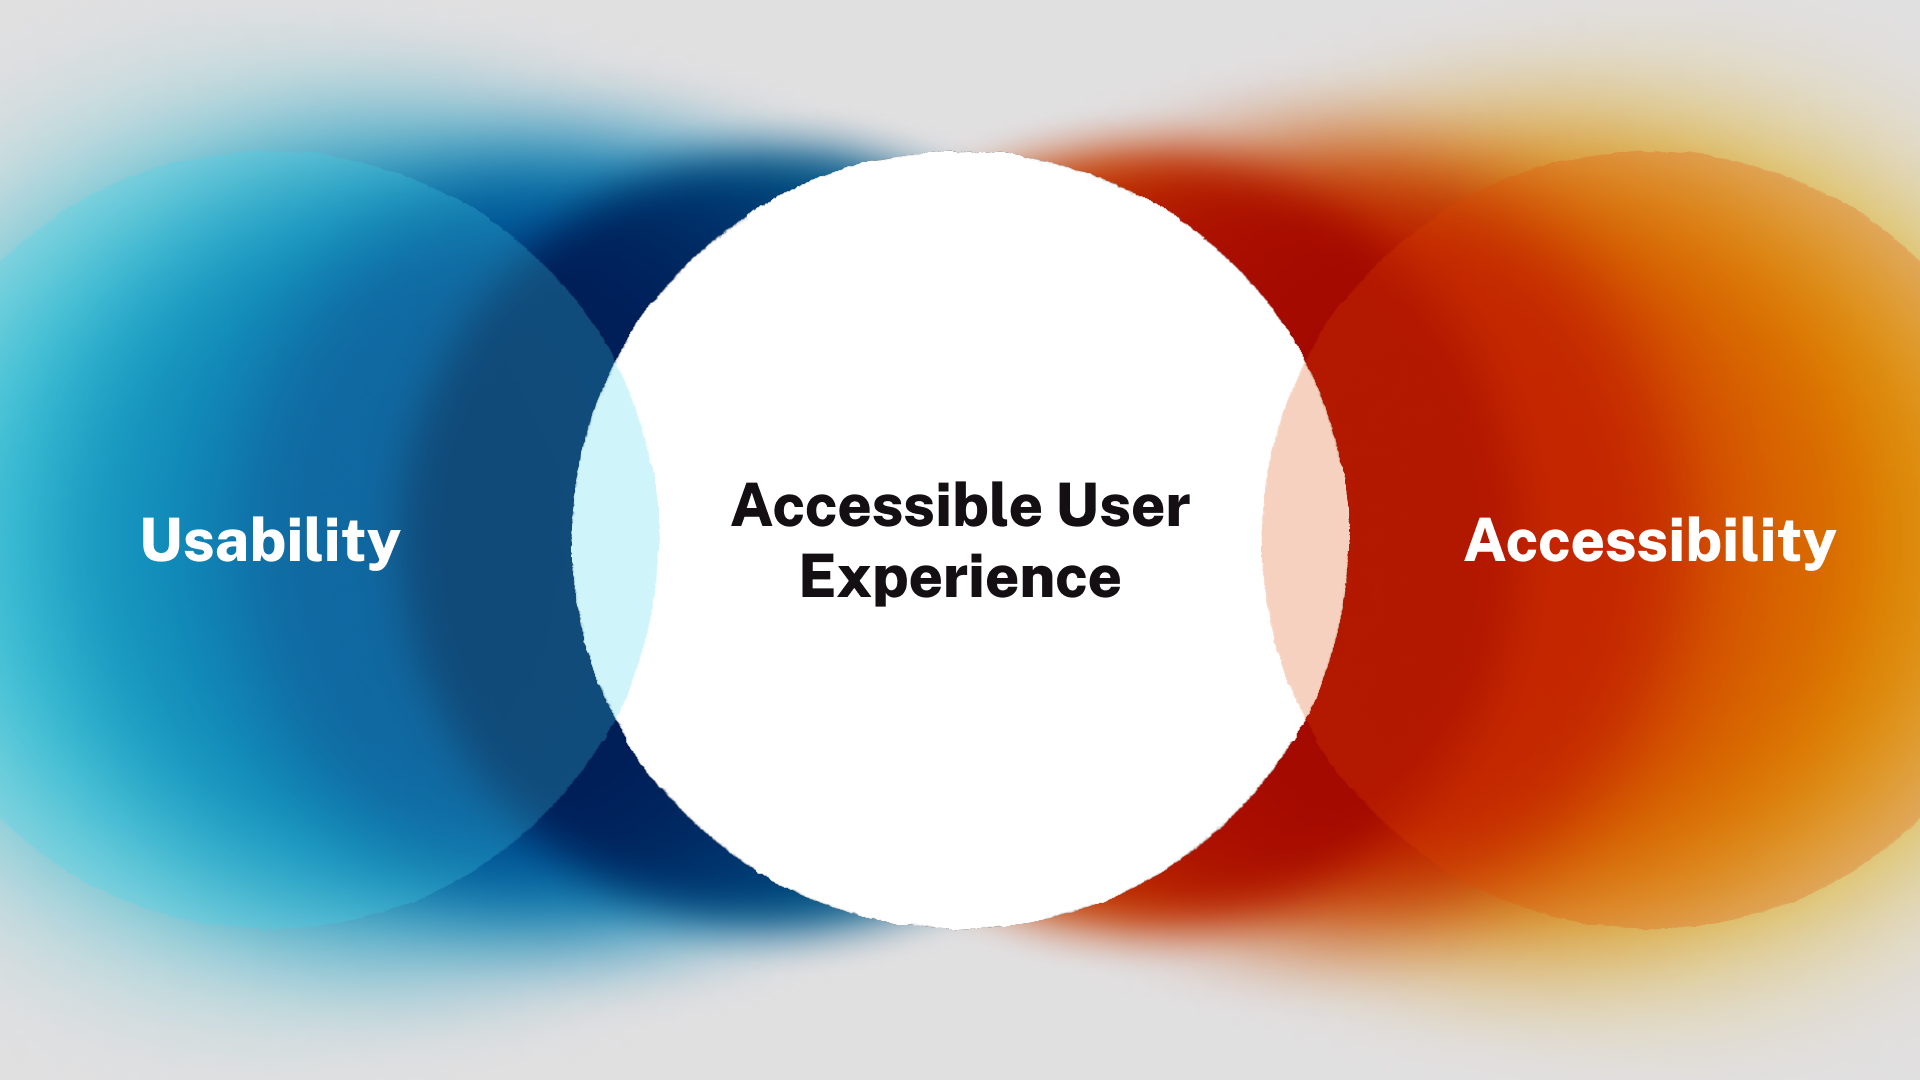 Ven diagram of Usability + Accessibility, both overlap with Accessible User Experience